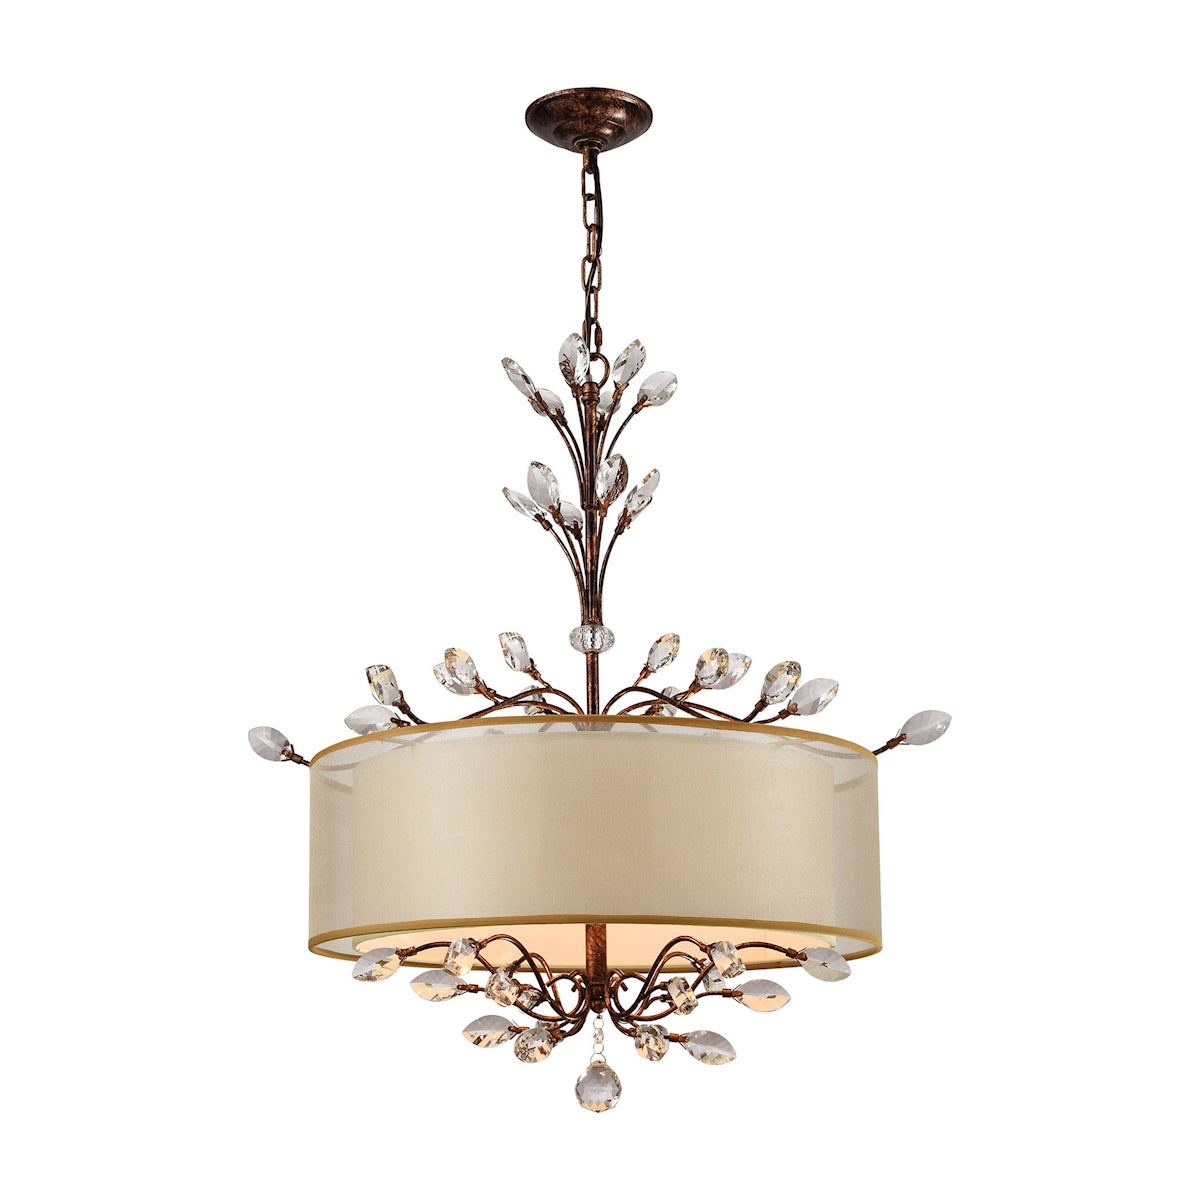 Asbury 4-Light Chandelier in Spanish Bronze with Organza and Fabric Shade